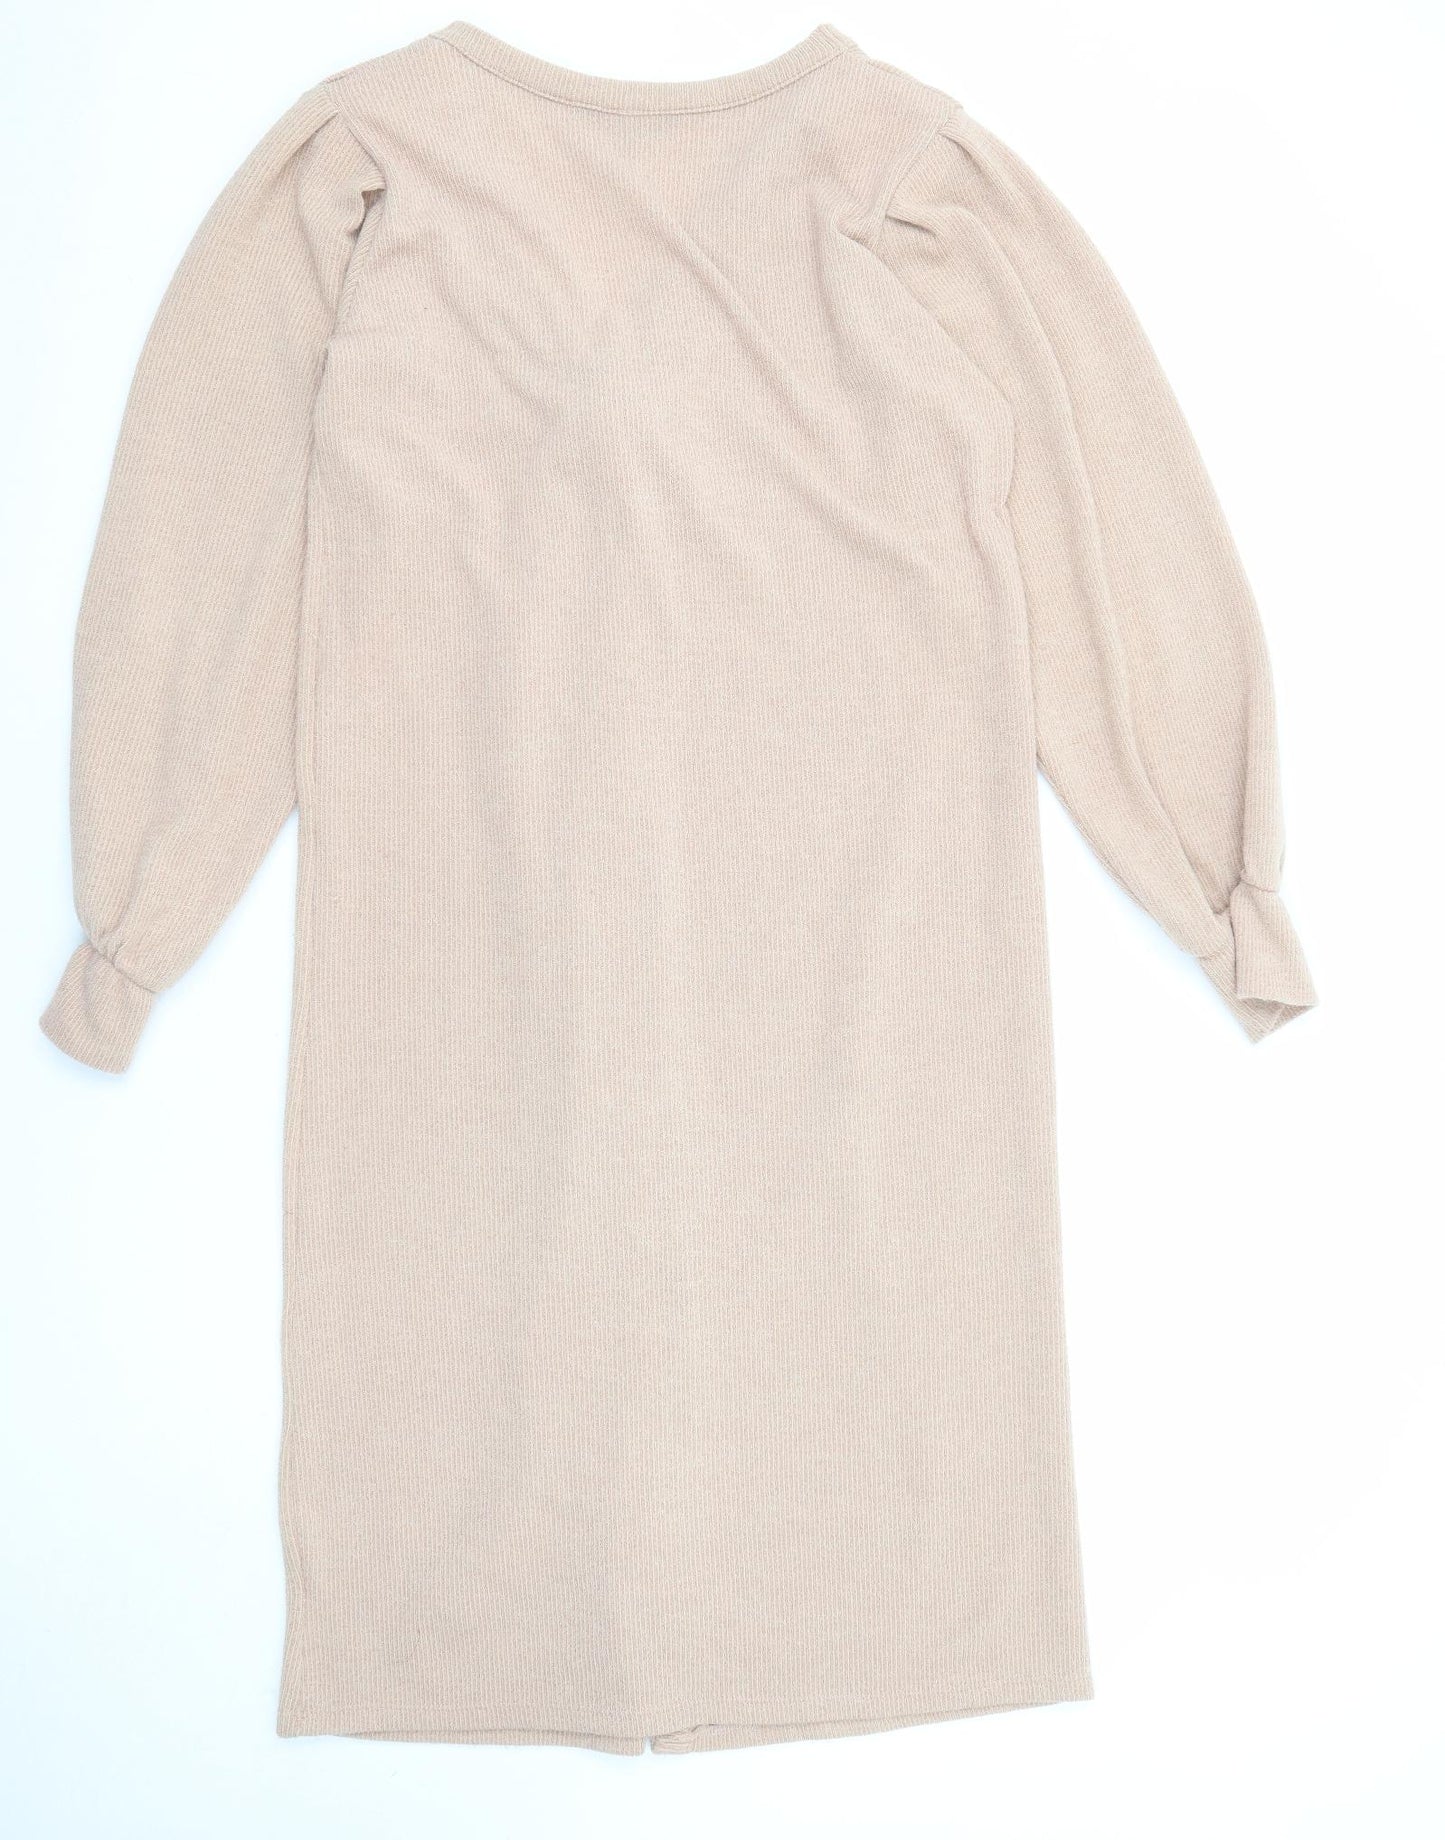 Lipsy Womens Beige Acrylic Jumper Dress Size 16 V-Neck Button - Ribbed Tie Detail